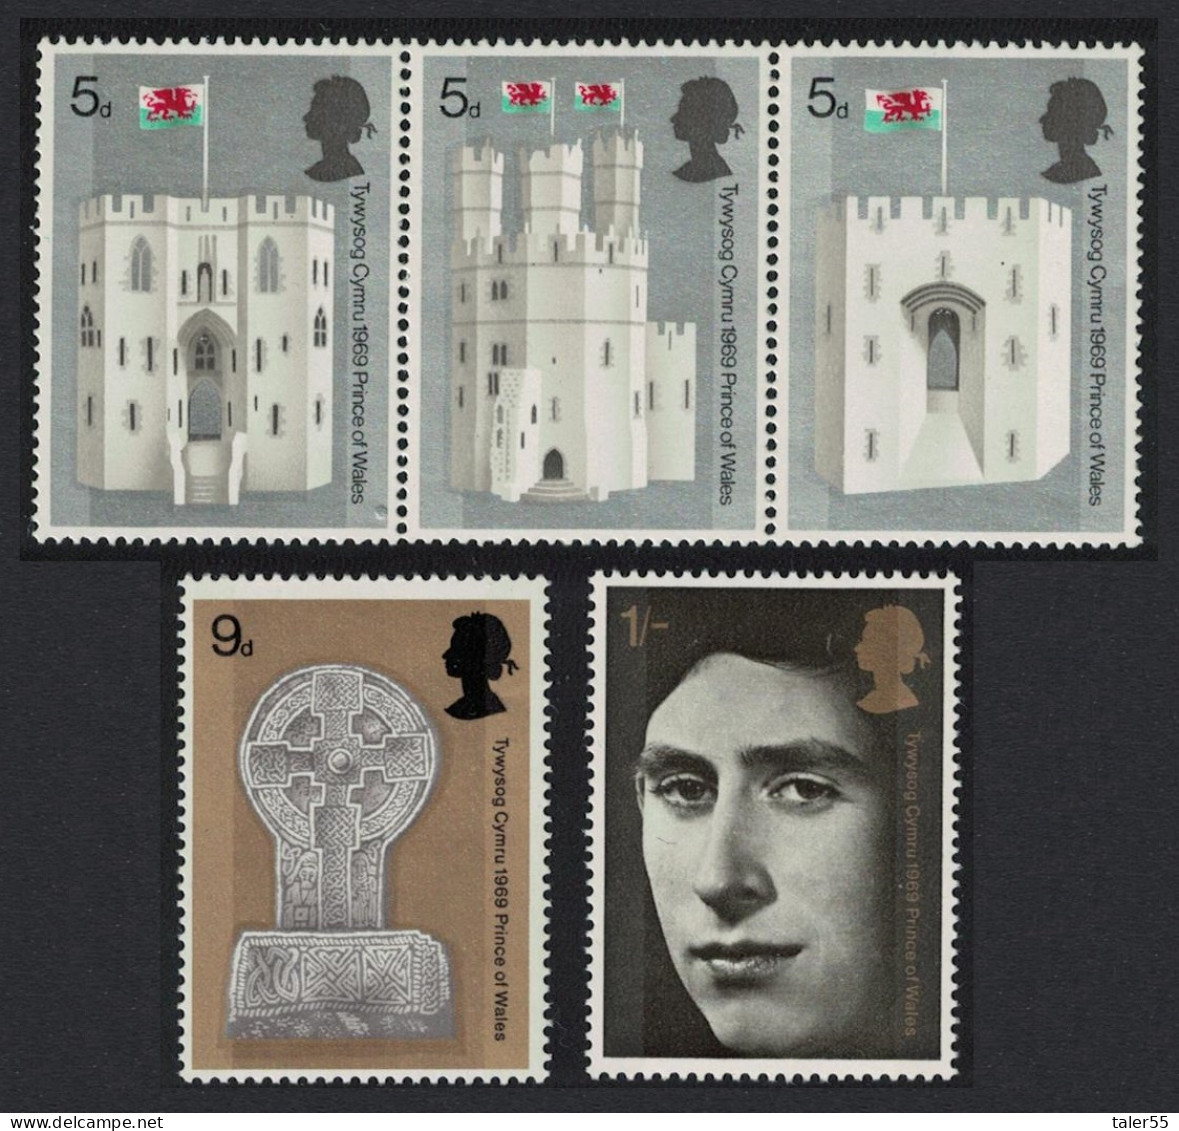 Great Britain Investiture Of The Prince Of Wales 5v 1969 MNH SG#802-806 Sc#597-599 - Ongebruikt